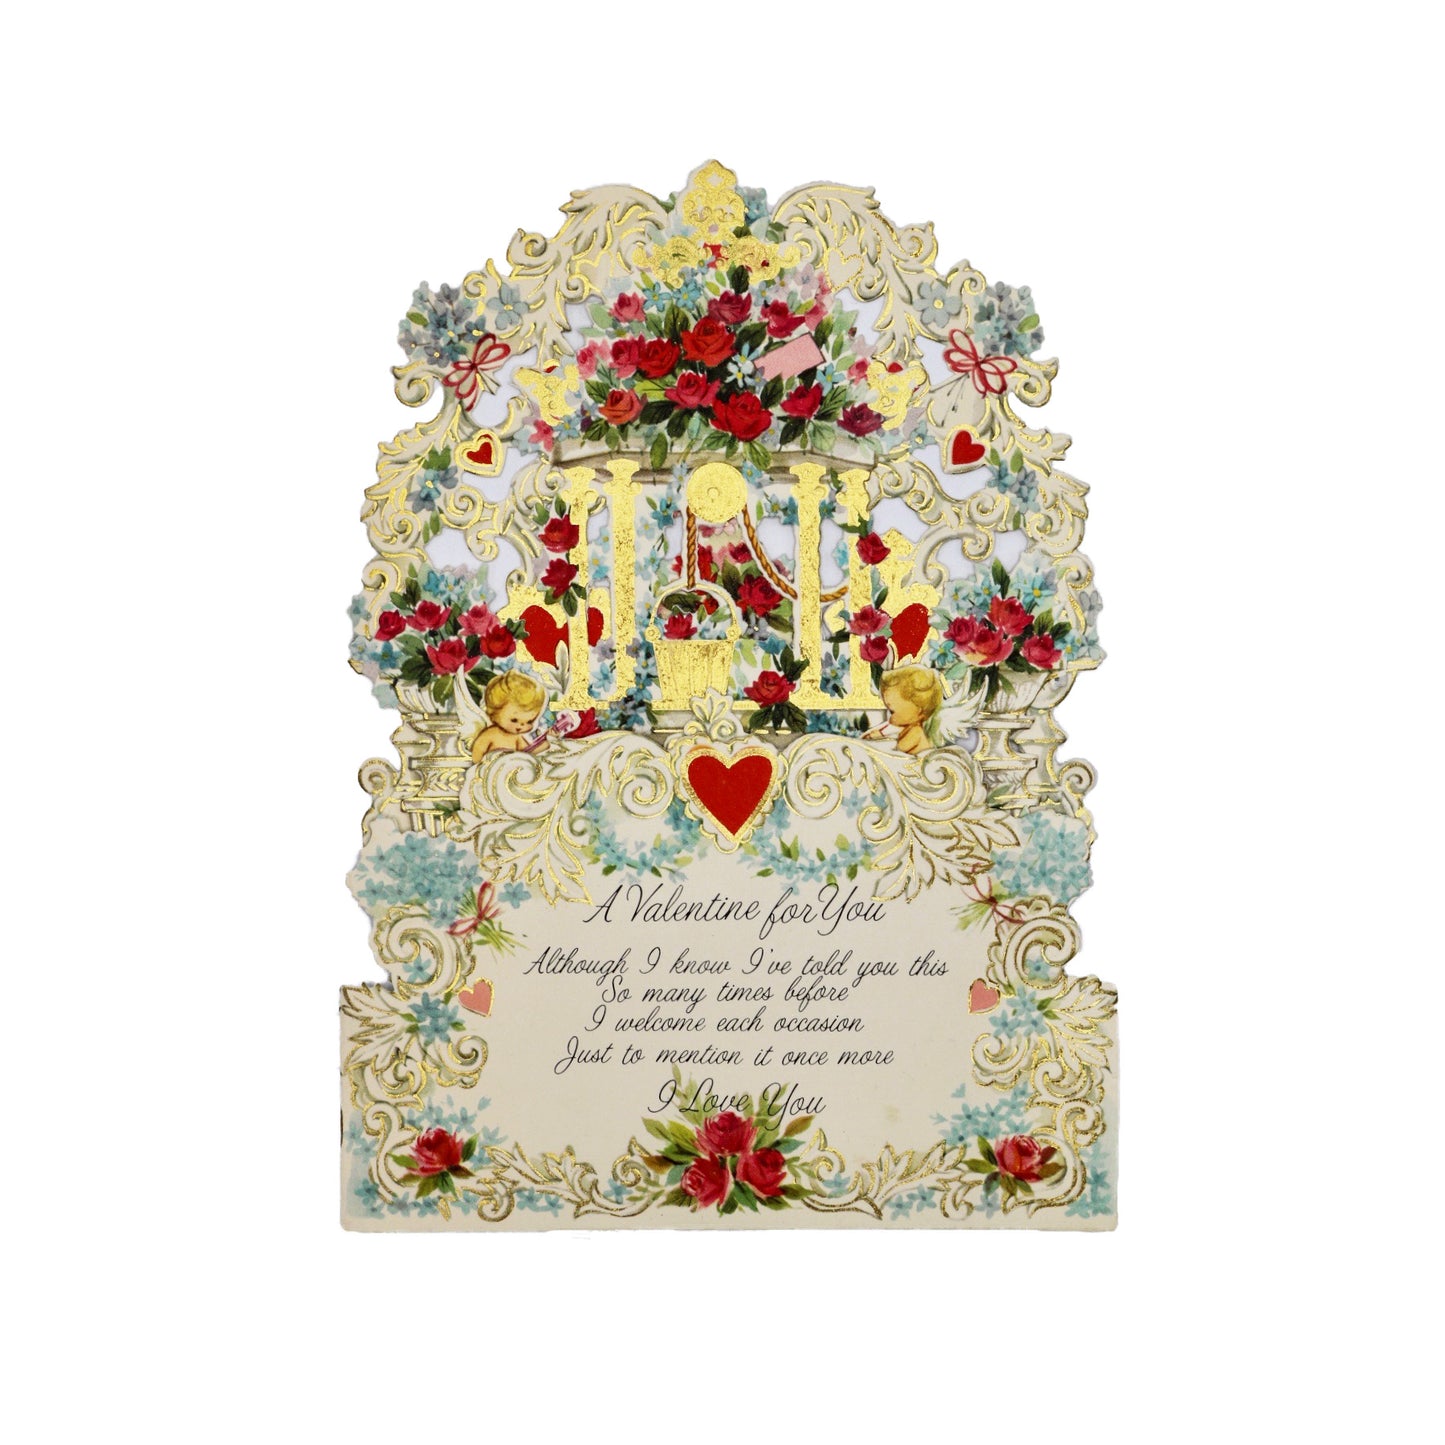 Pop-Up Vintage Victorian Valentine's Day Card - For You